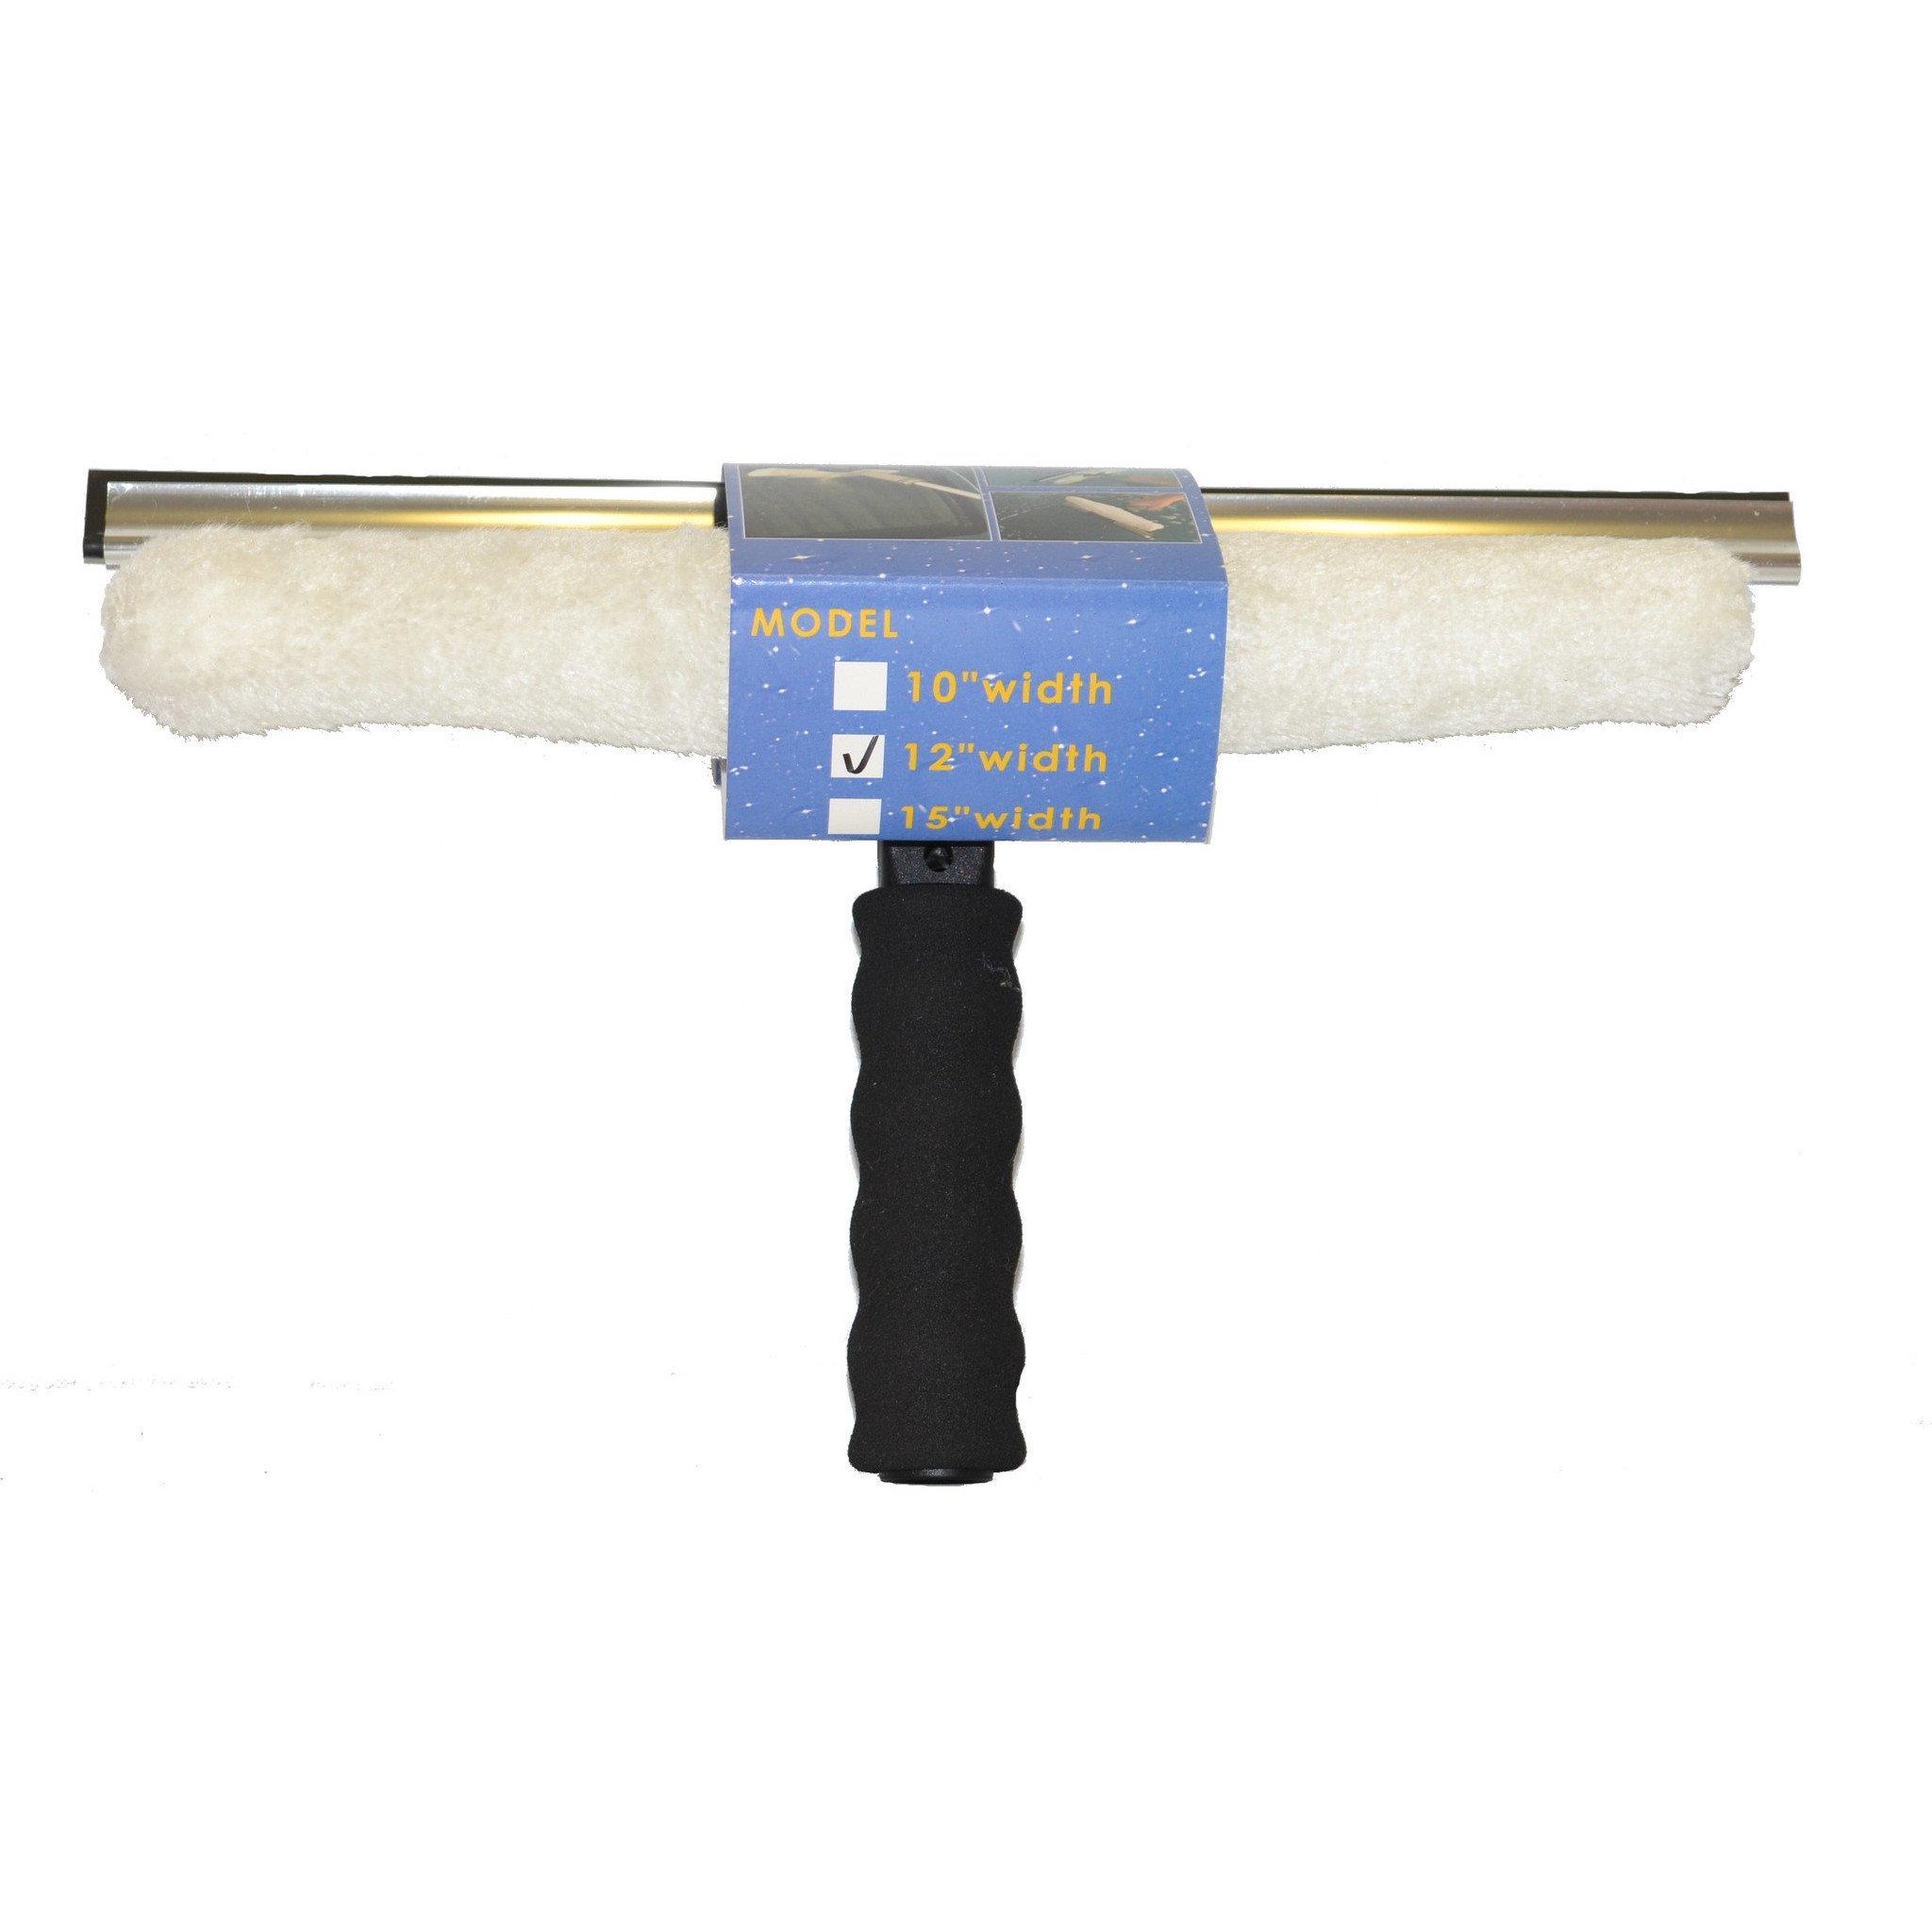 SQUEEGEE ATTACHMENT FOR WASH BRUSH - Parma Automotive